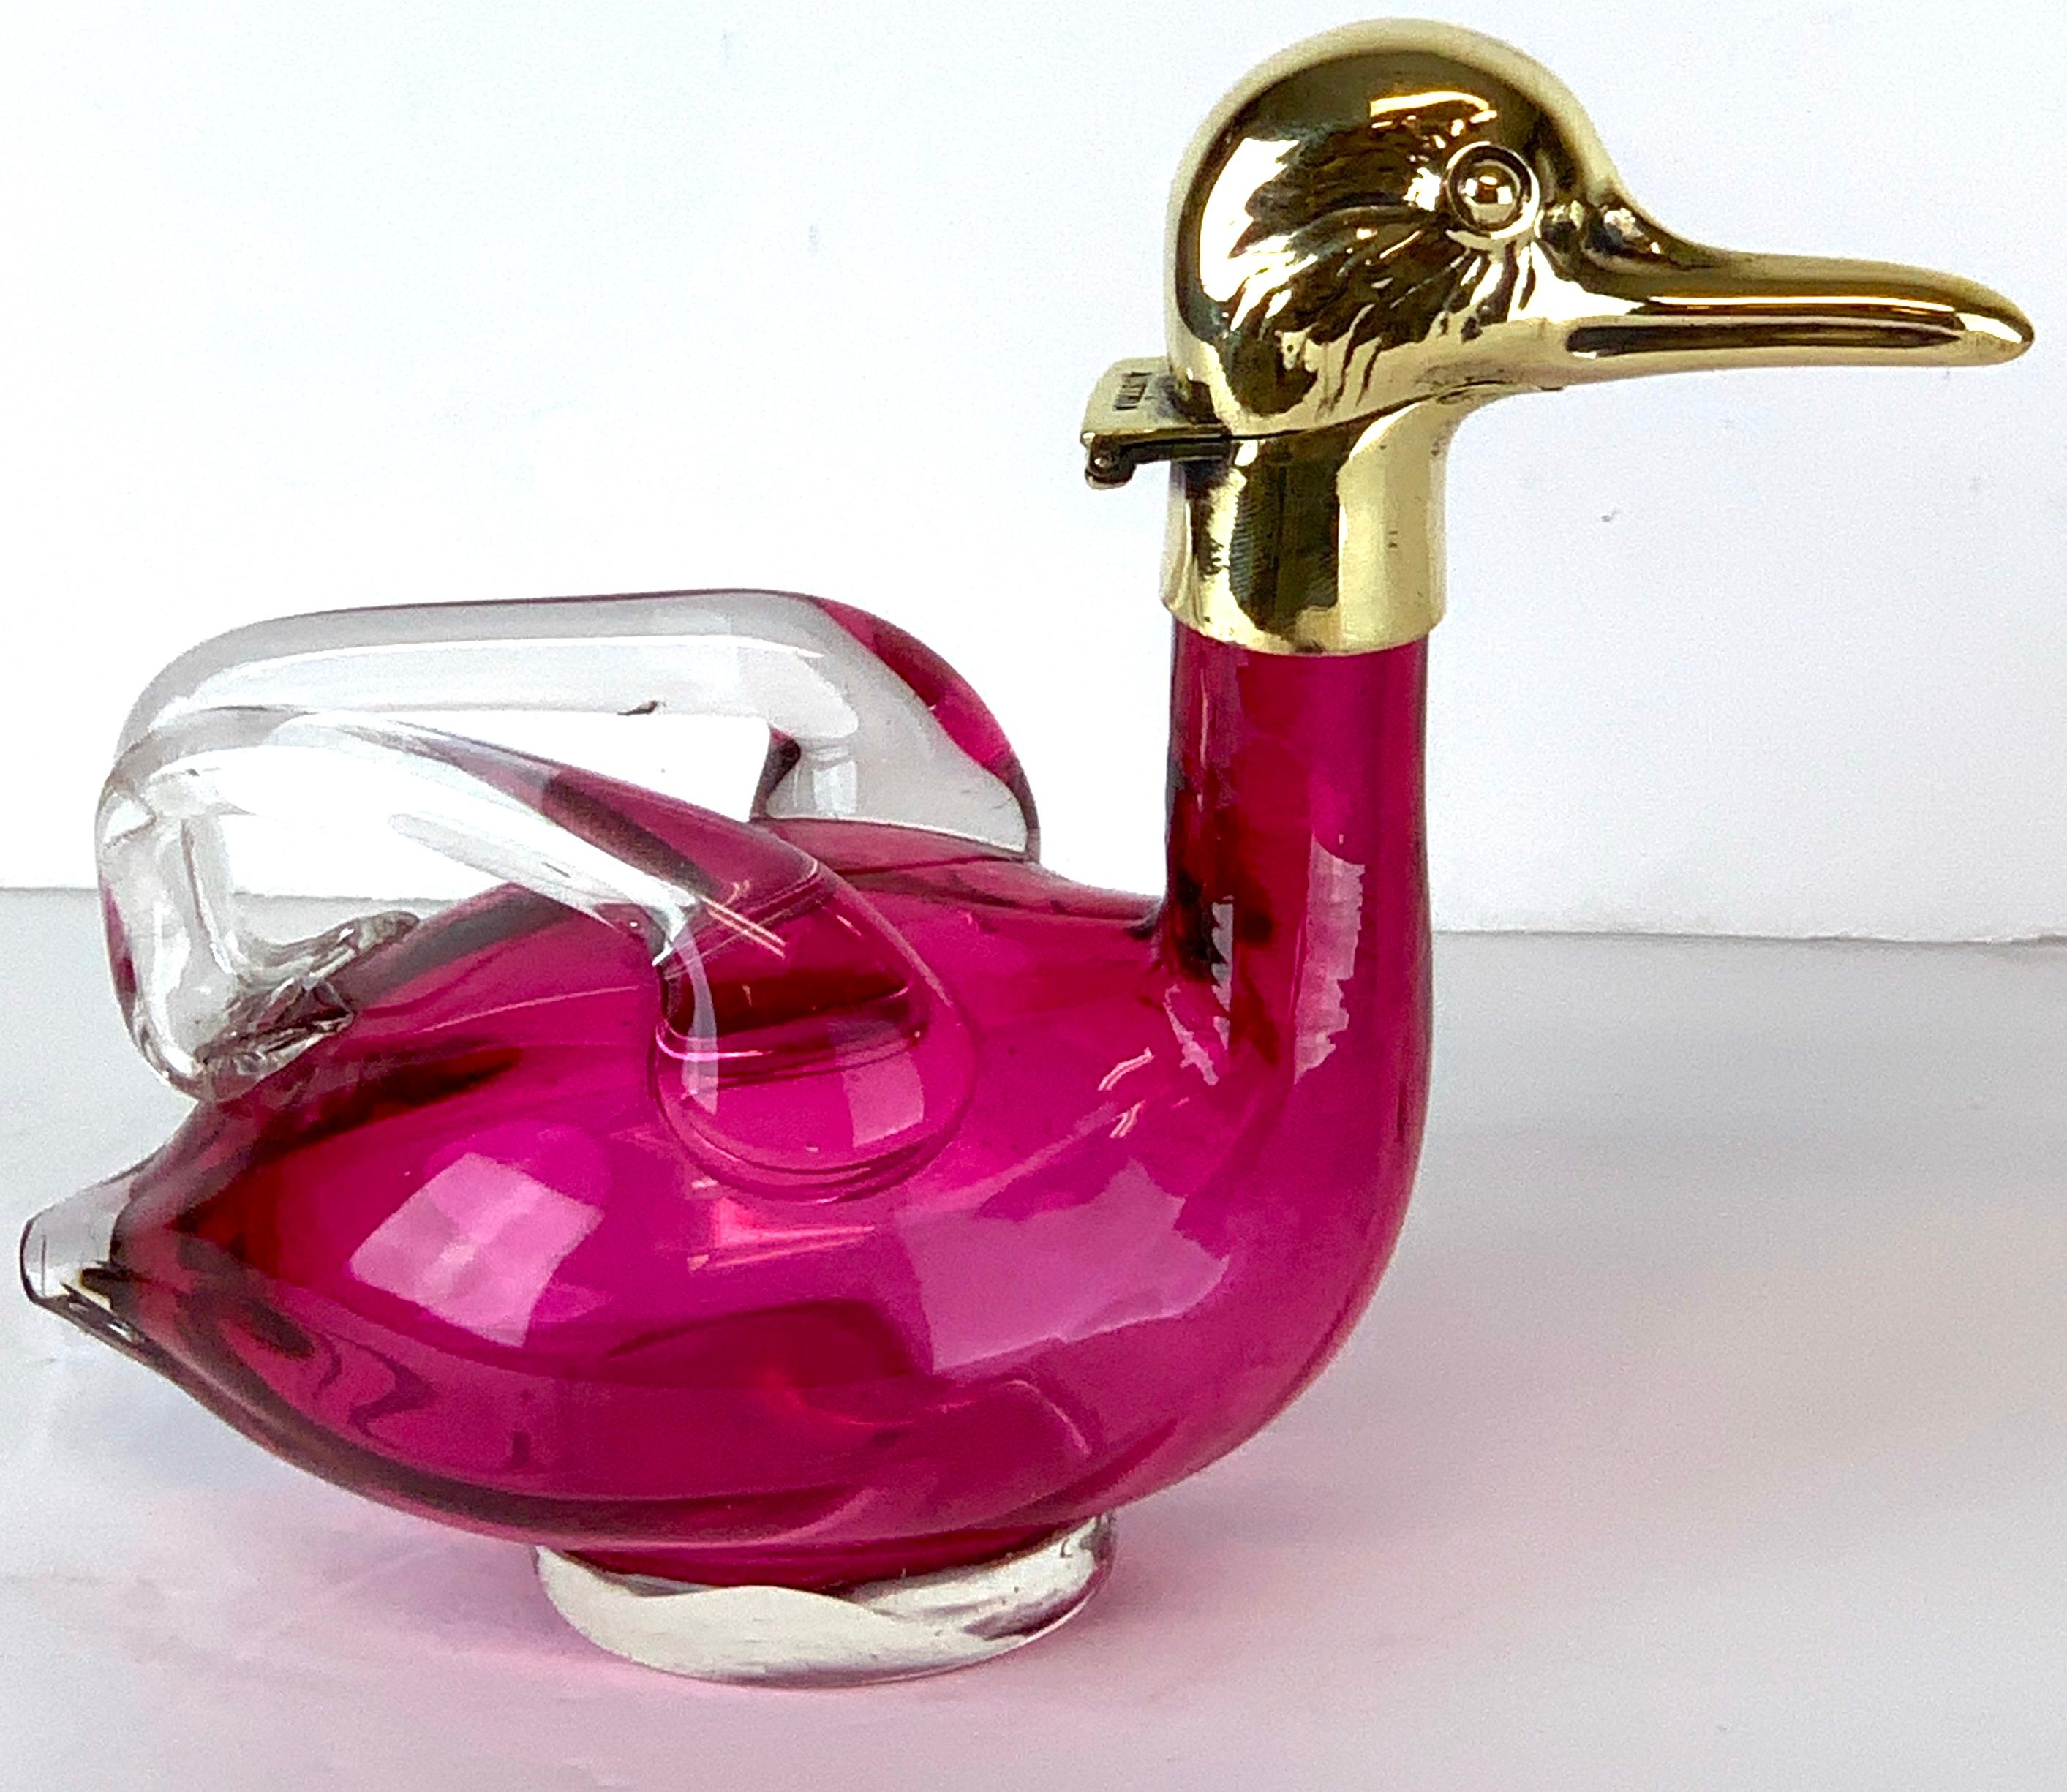 Art Deco Austrian brass & cranberry crystal duck decanter, whimsical, realistically modeled. Stamped Austria, circa 1925. Professionally polished and cleaned, Ready to place, no flaws observed.